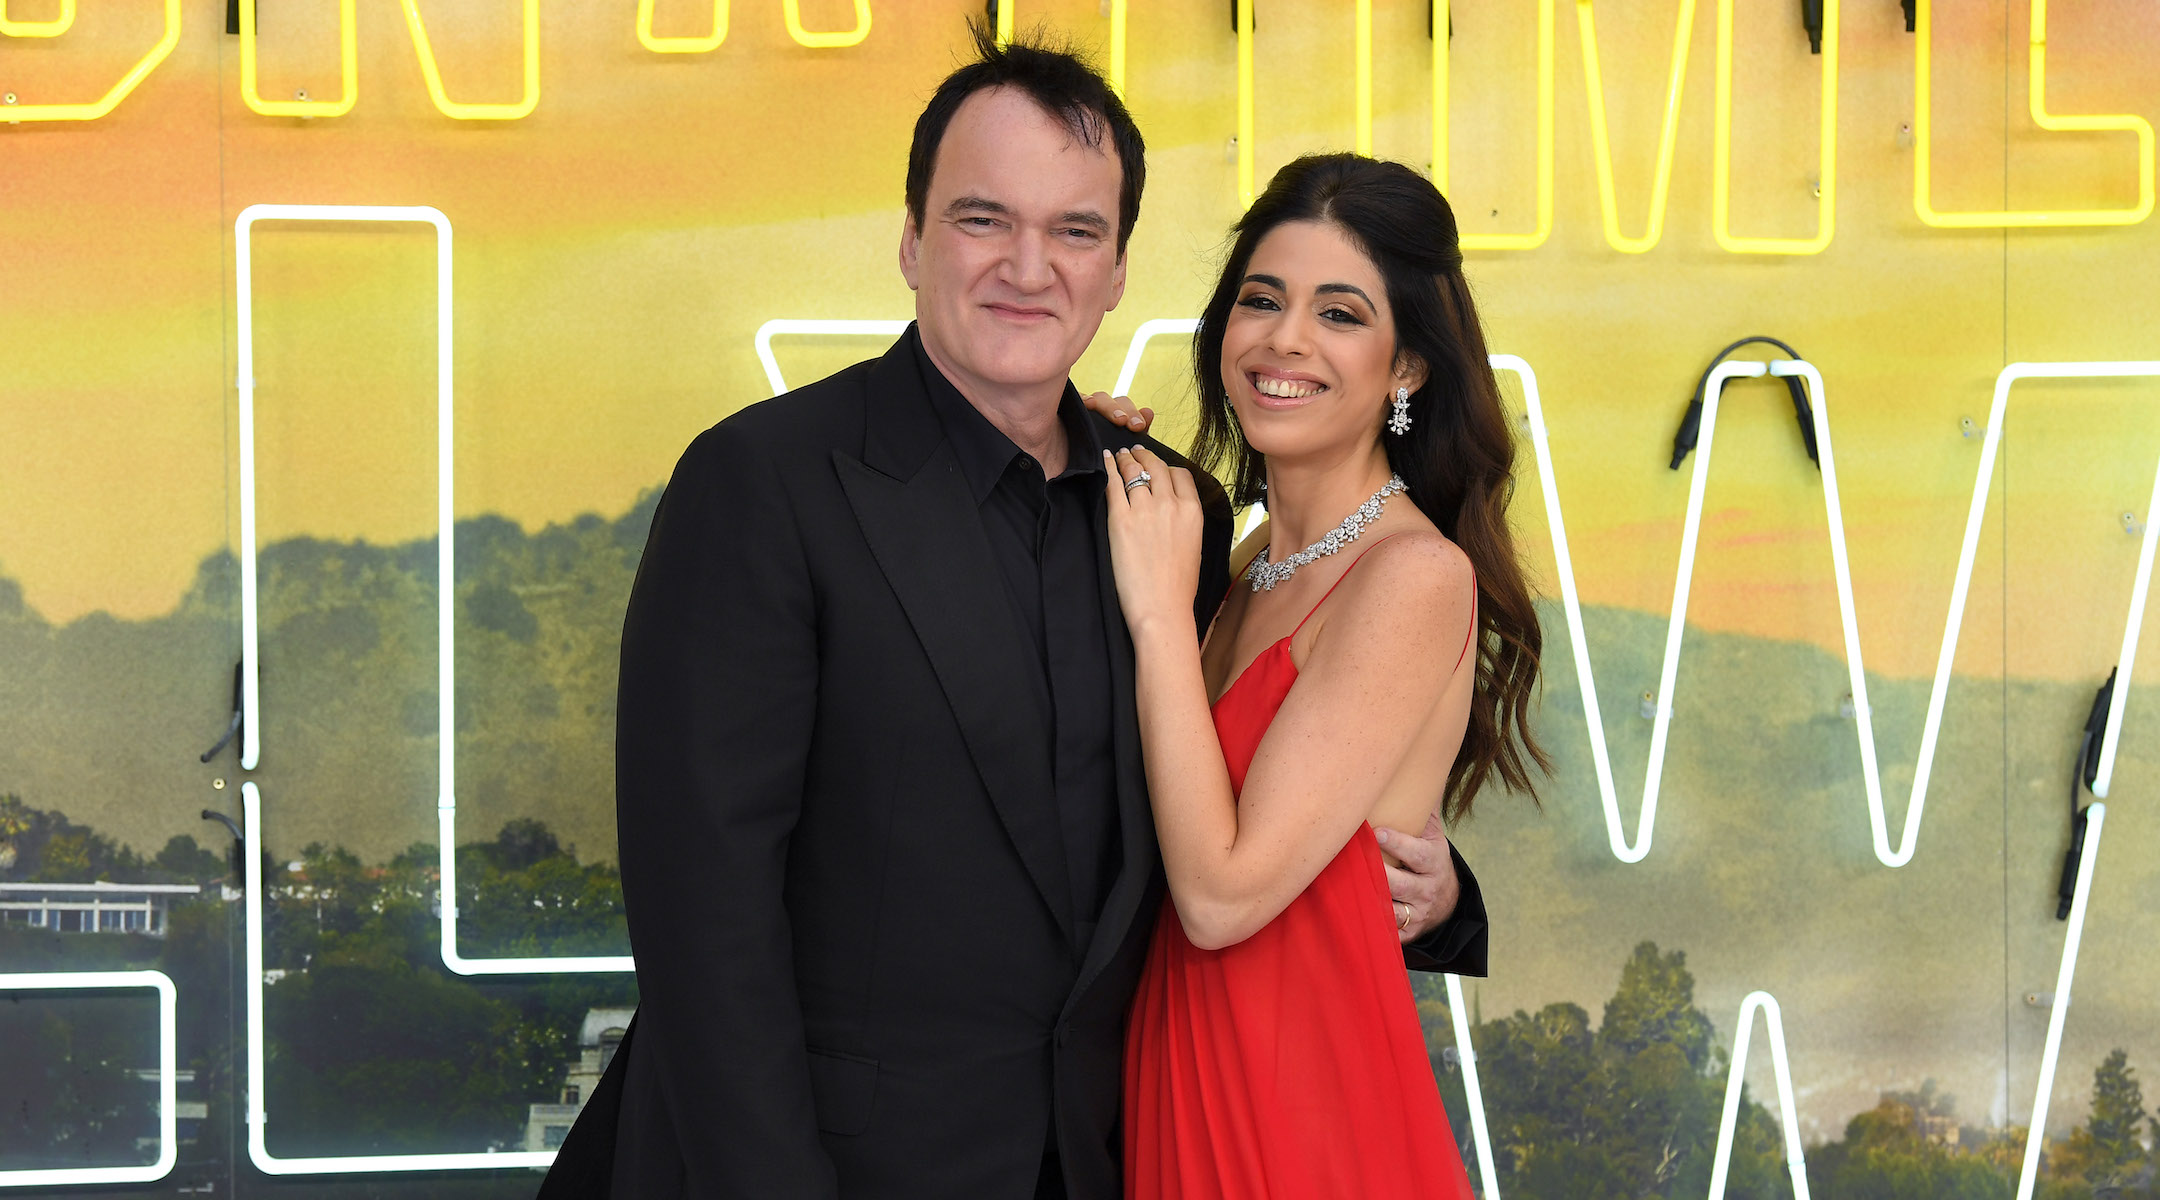 Quentin Tarantino and Daniella Pick attend the "Once Upon a Time In Hollywood" U.K. Premiere at the Odeon Luxe Leicester Square in London, July 30, 2019. (Karwai Tang/WireImage/Getty Images)